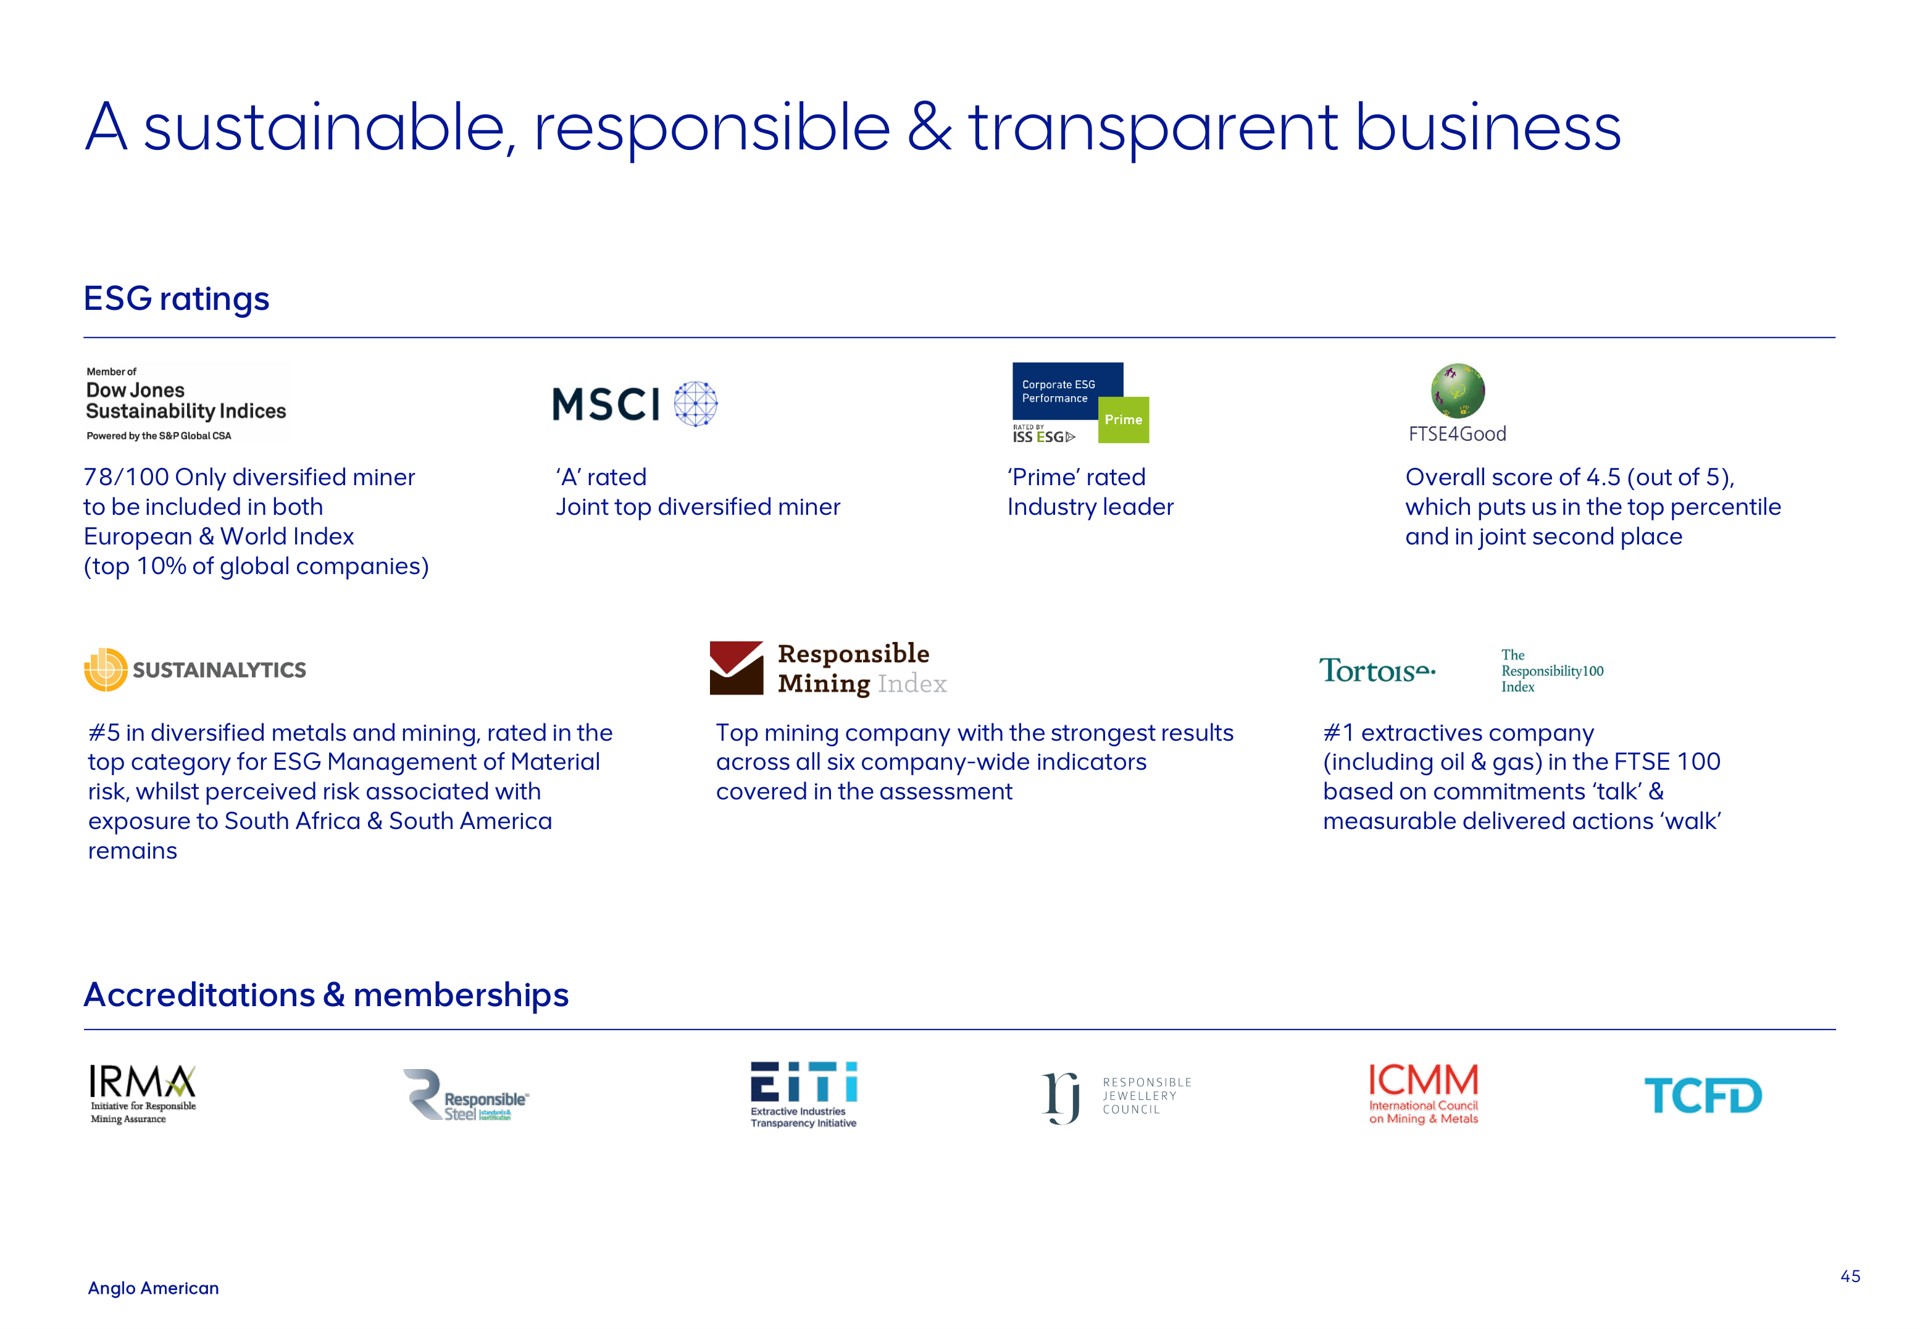 a sustainable responsible transparent business | AngloAmerican